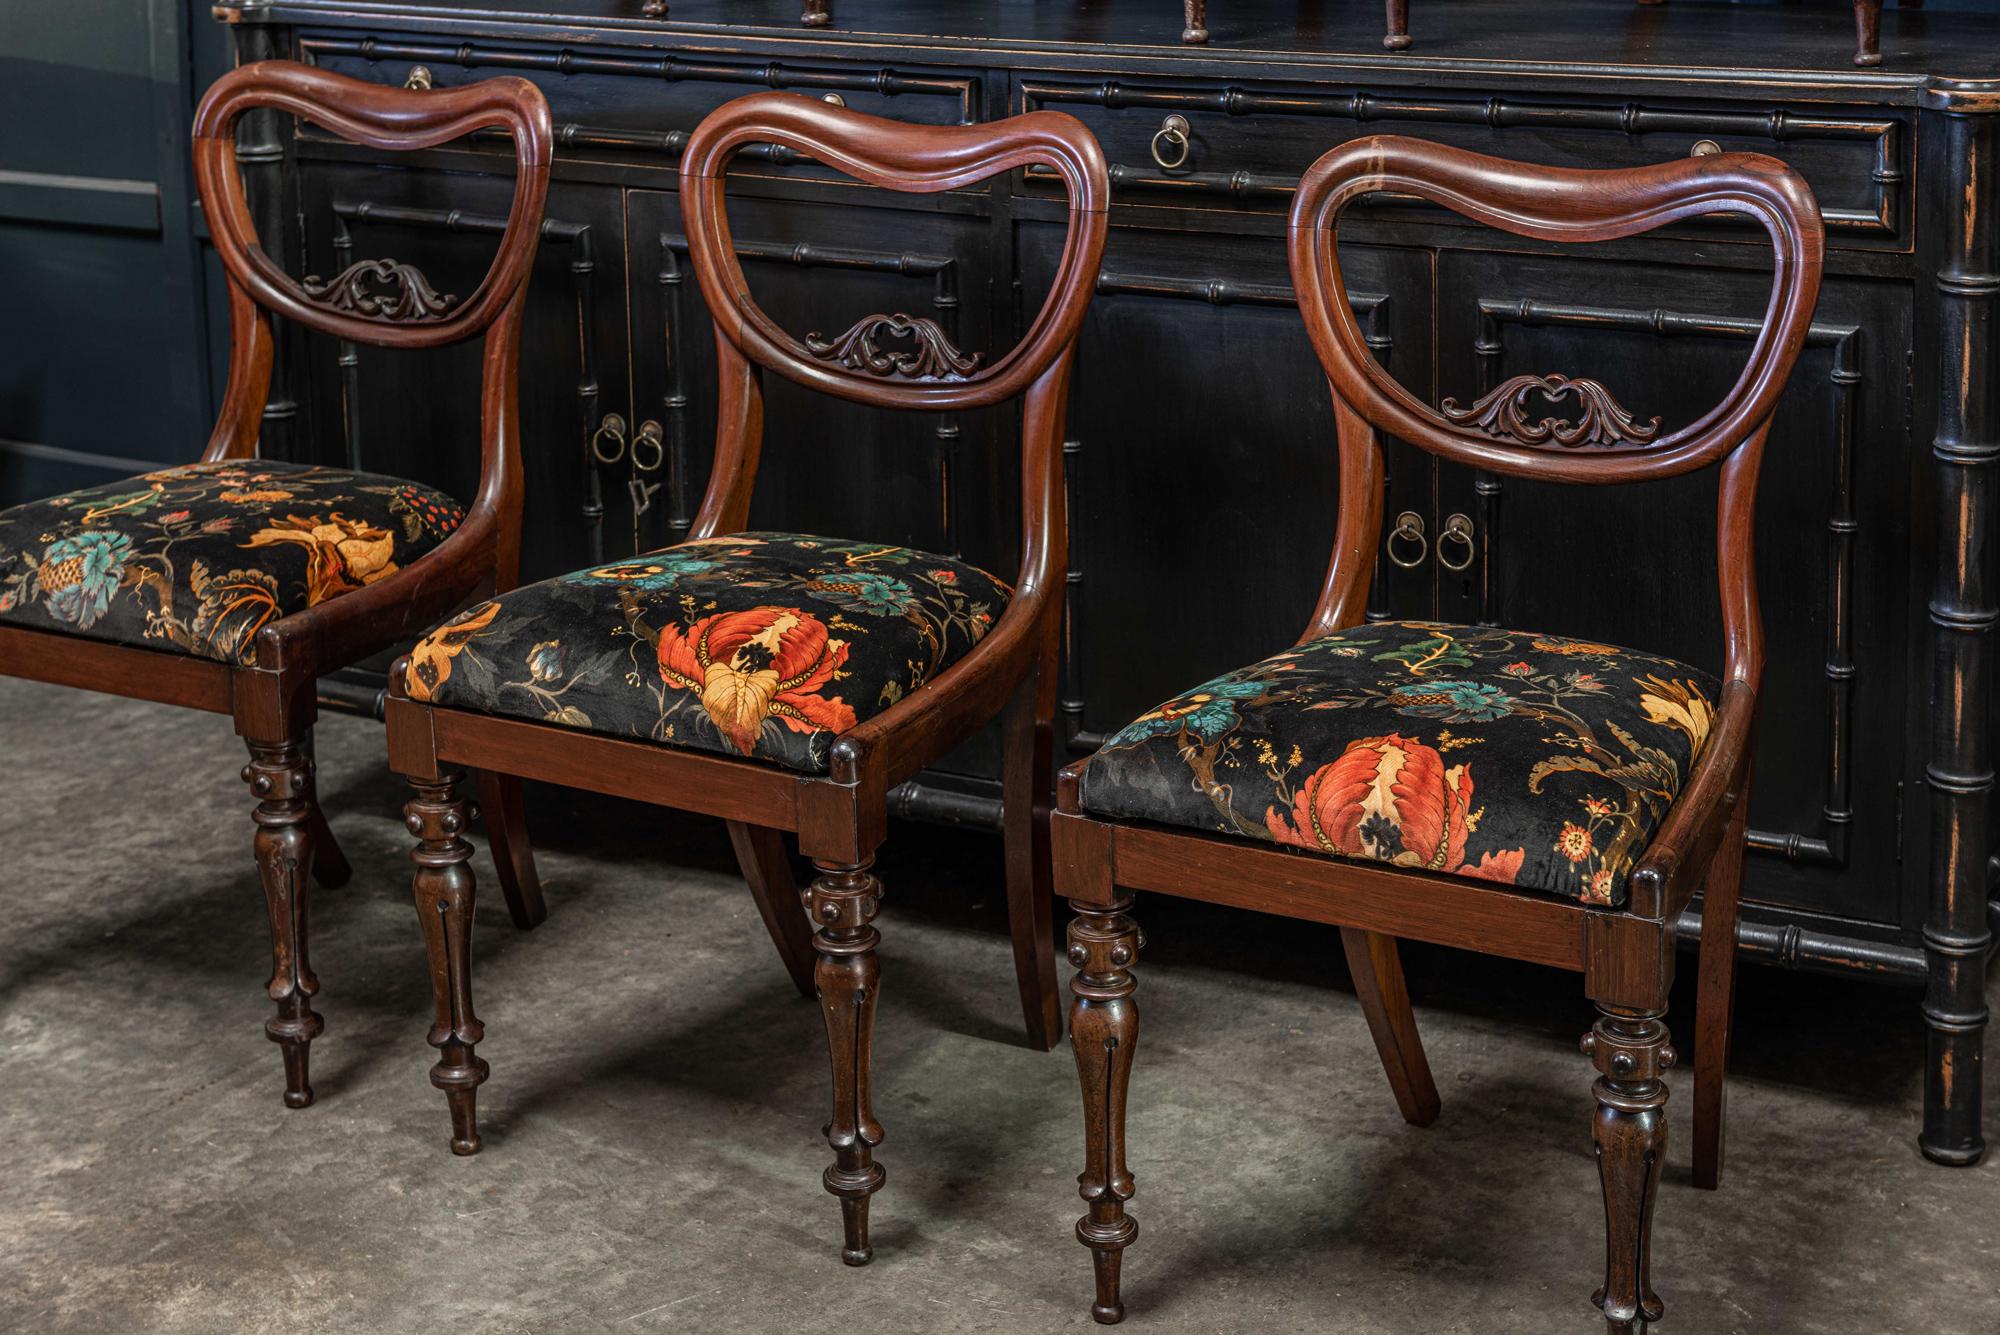 English 19th century set of 6 rosewood upholstered chairs,
circa 1870.

Set of 6 excellent quality rosewood balloon back upholstered dining chairs.

Upholstered in Artemis Velvet.

Measures: W 47 x D 45 x H 85cm

Seat height 50cm.